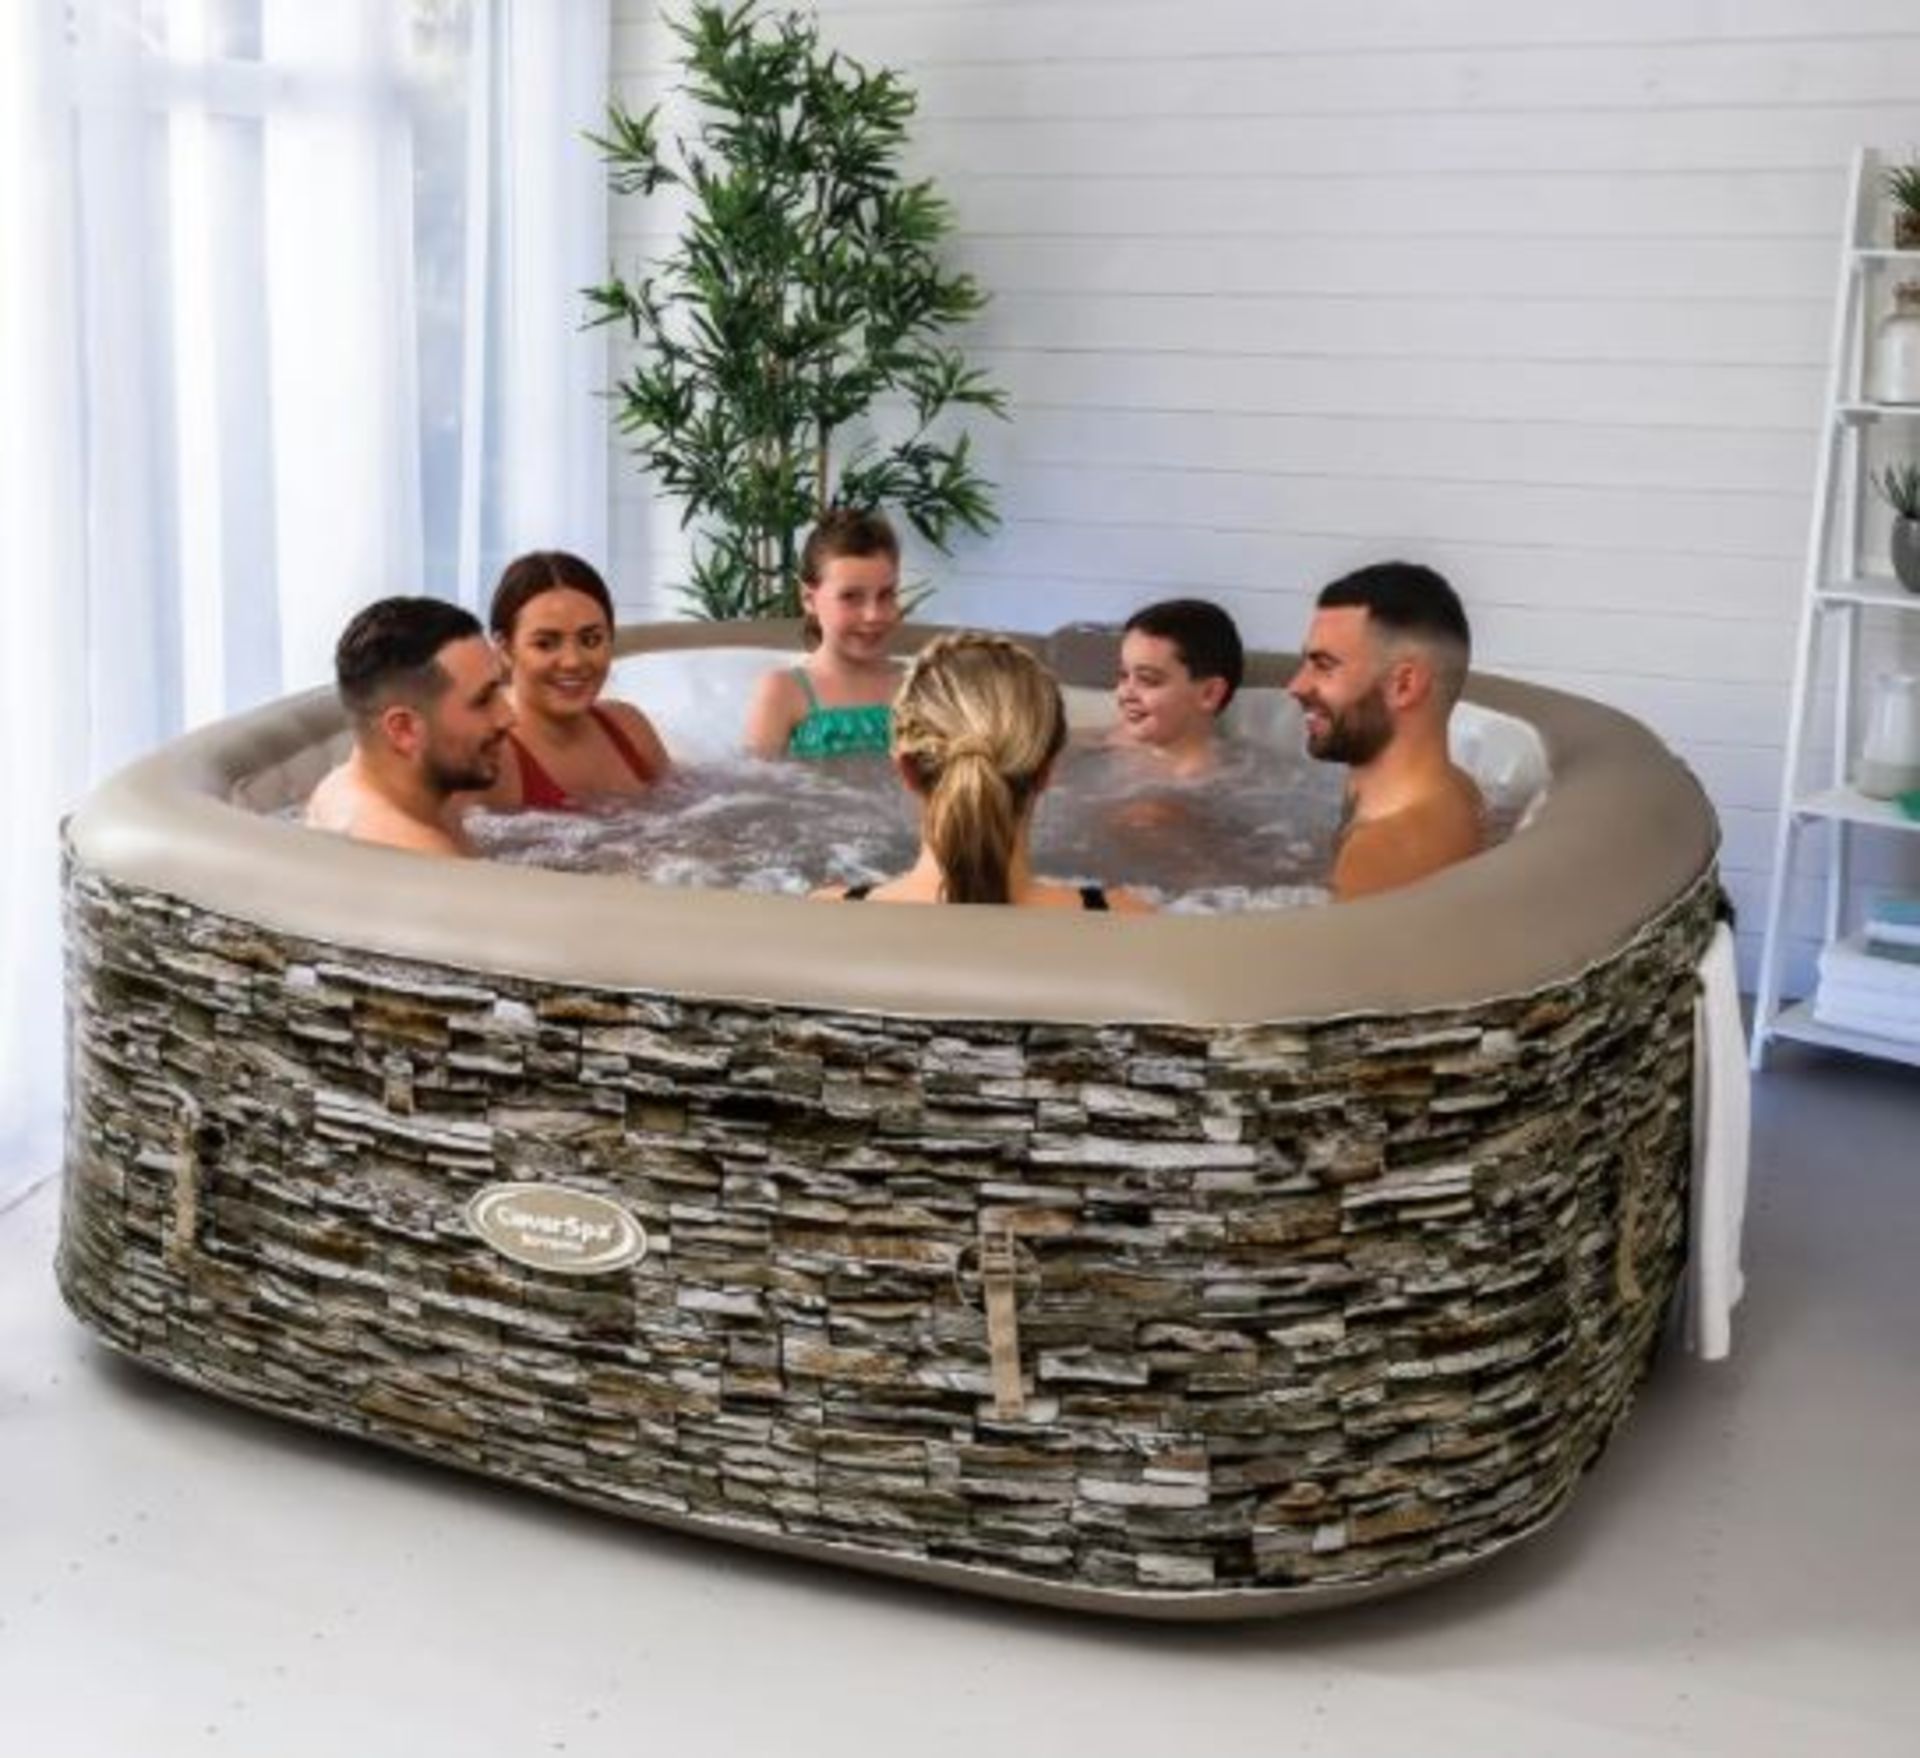 (R7C) 1x Cleverspa Sorrento 6 Person Hot Tub RRP £600.